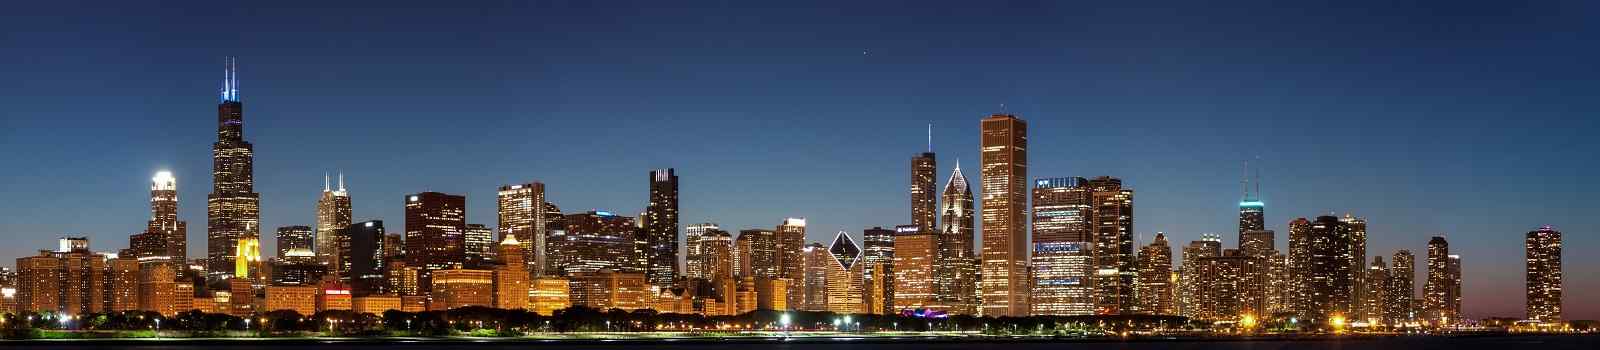 KL-USA-CAD-CHICAGO-NY -Chicago downtown city skyline at night and Michigan lake shore 106951187